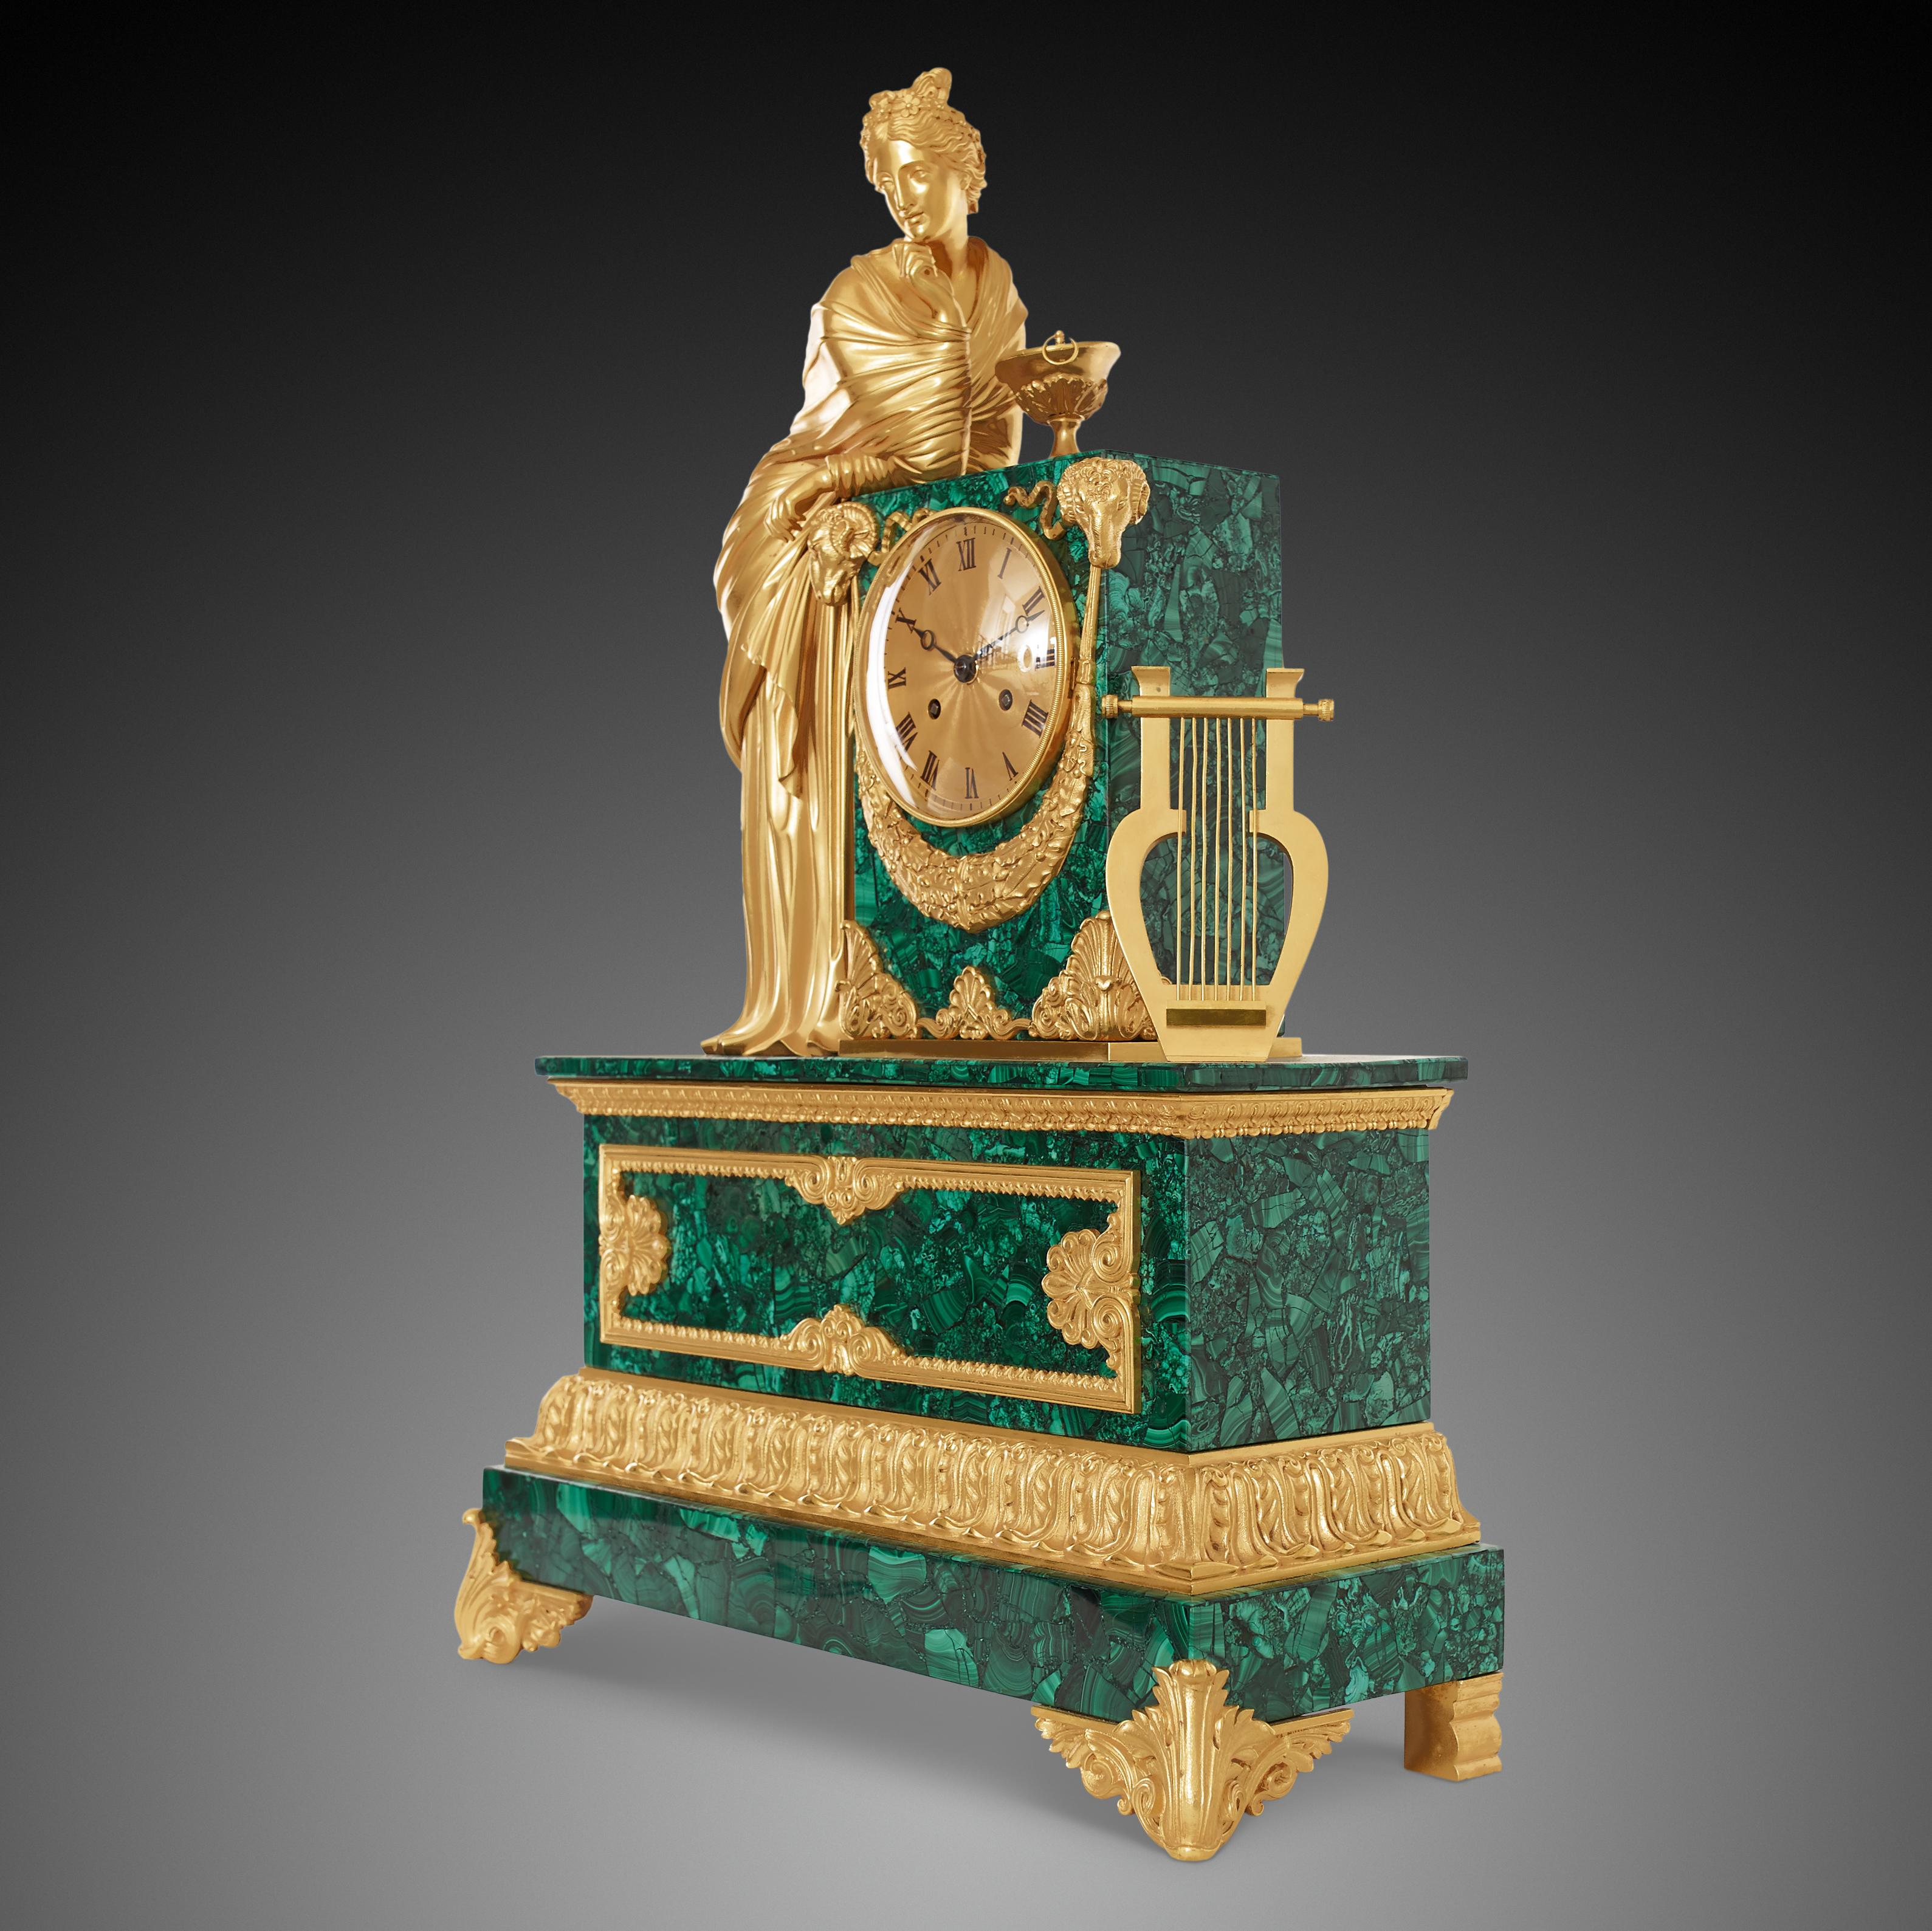 Fine Louis Phillippe, circa 1830-1850, French gilt bronze allegorical mantel clock. Circular dial with Roman numerals mounted within an embossed gilt bezel. Silk suspension eight-day movement striking a bell enclosed in a rectangular case. Allegory